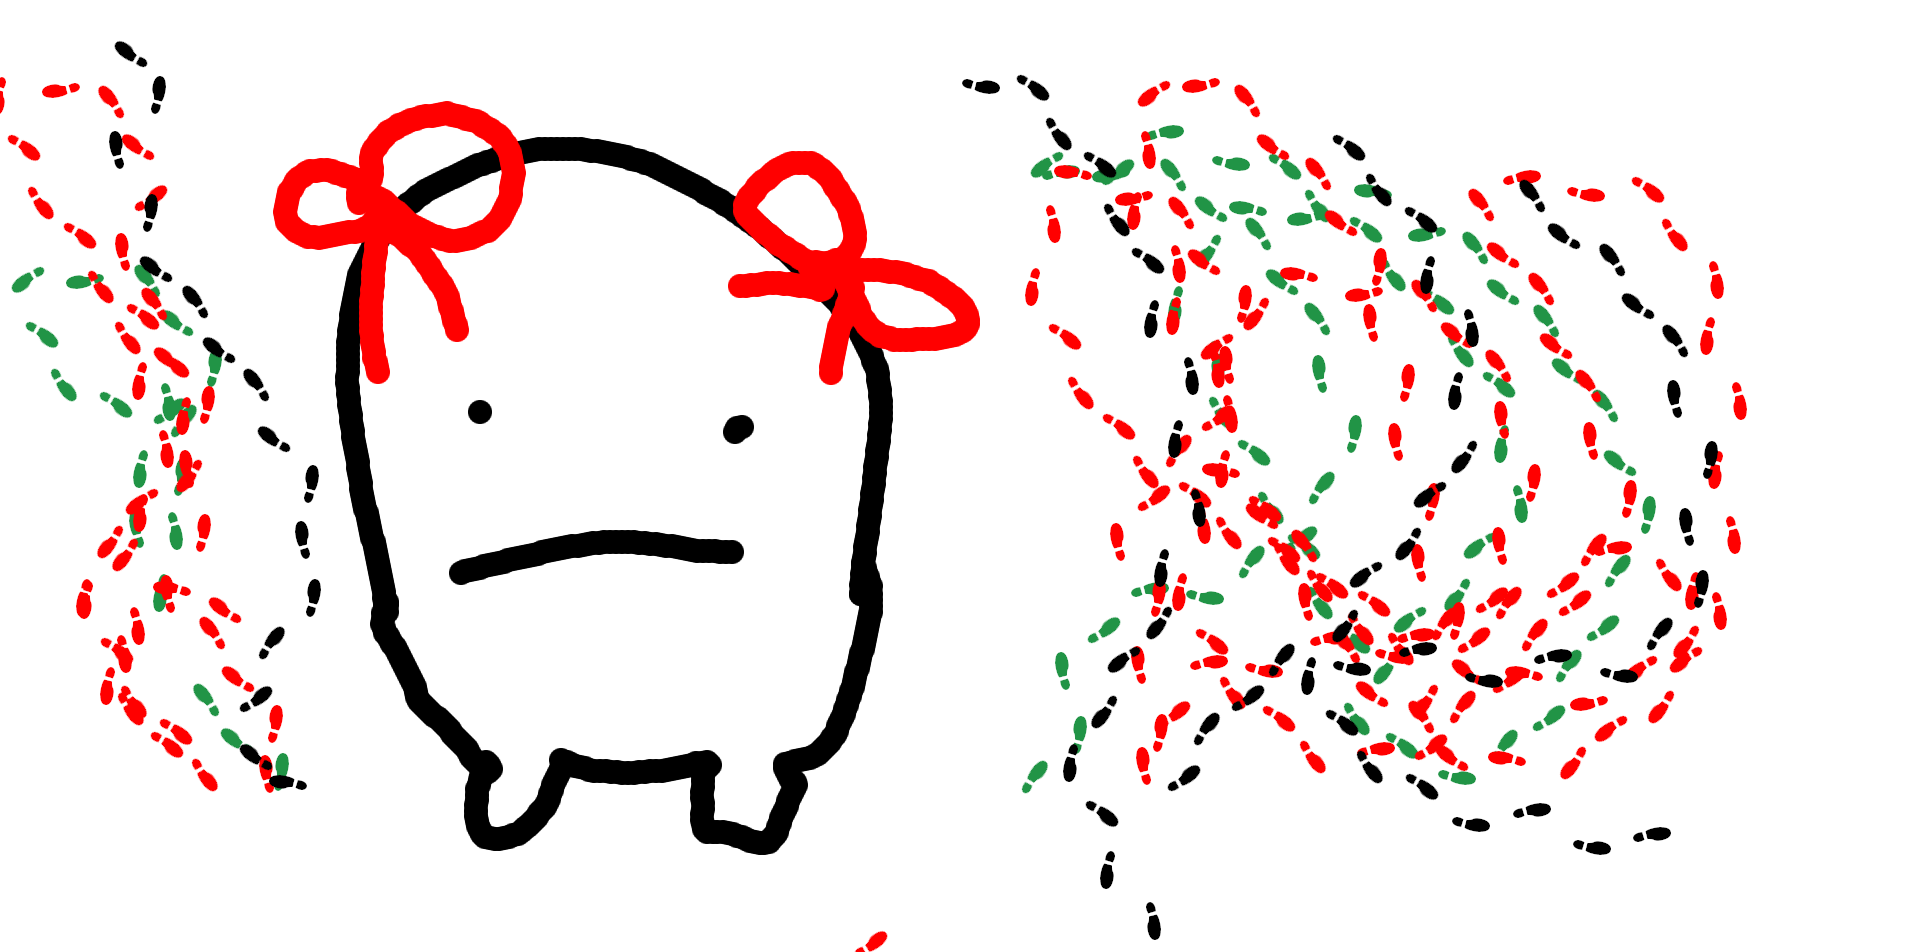 a drawing of kate, a white round figure with two red hairbows, making a neutral expression. she is surrounded by footprints.